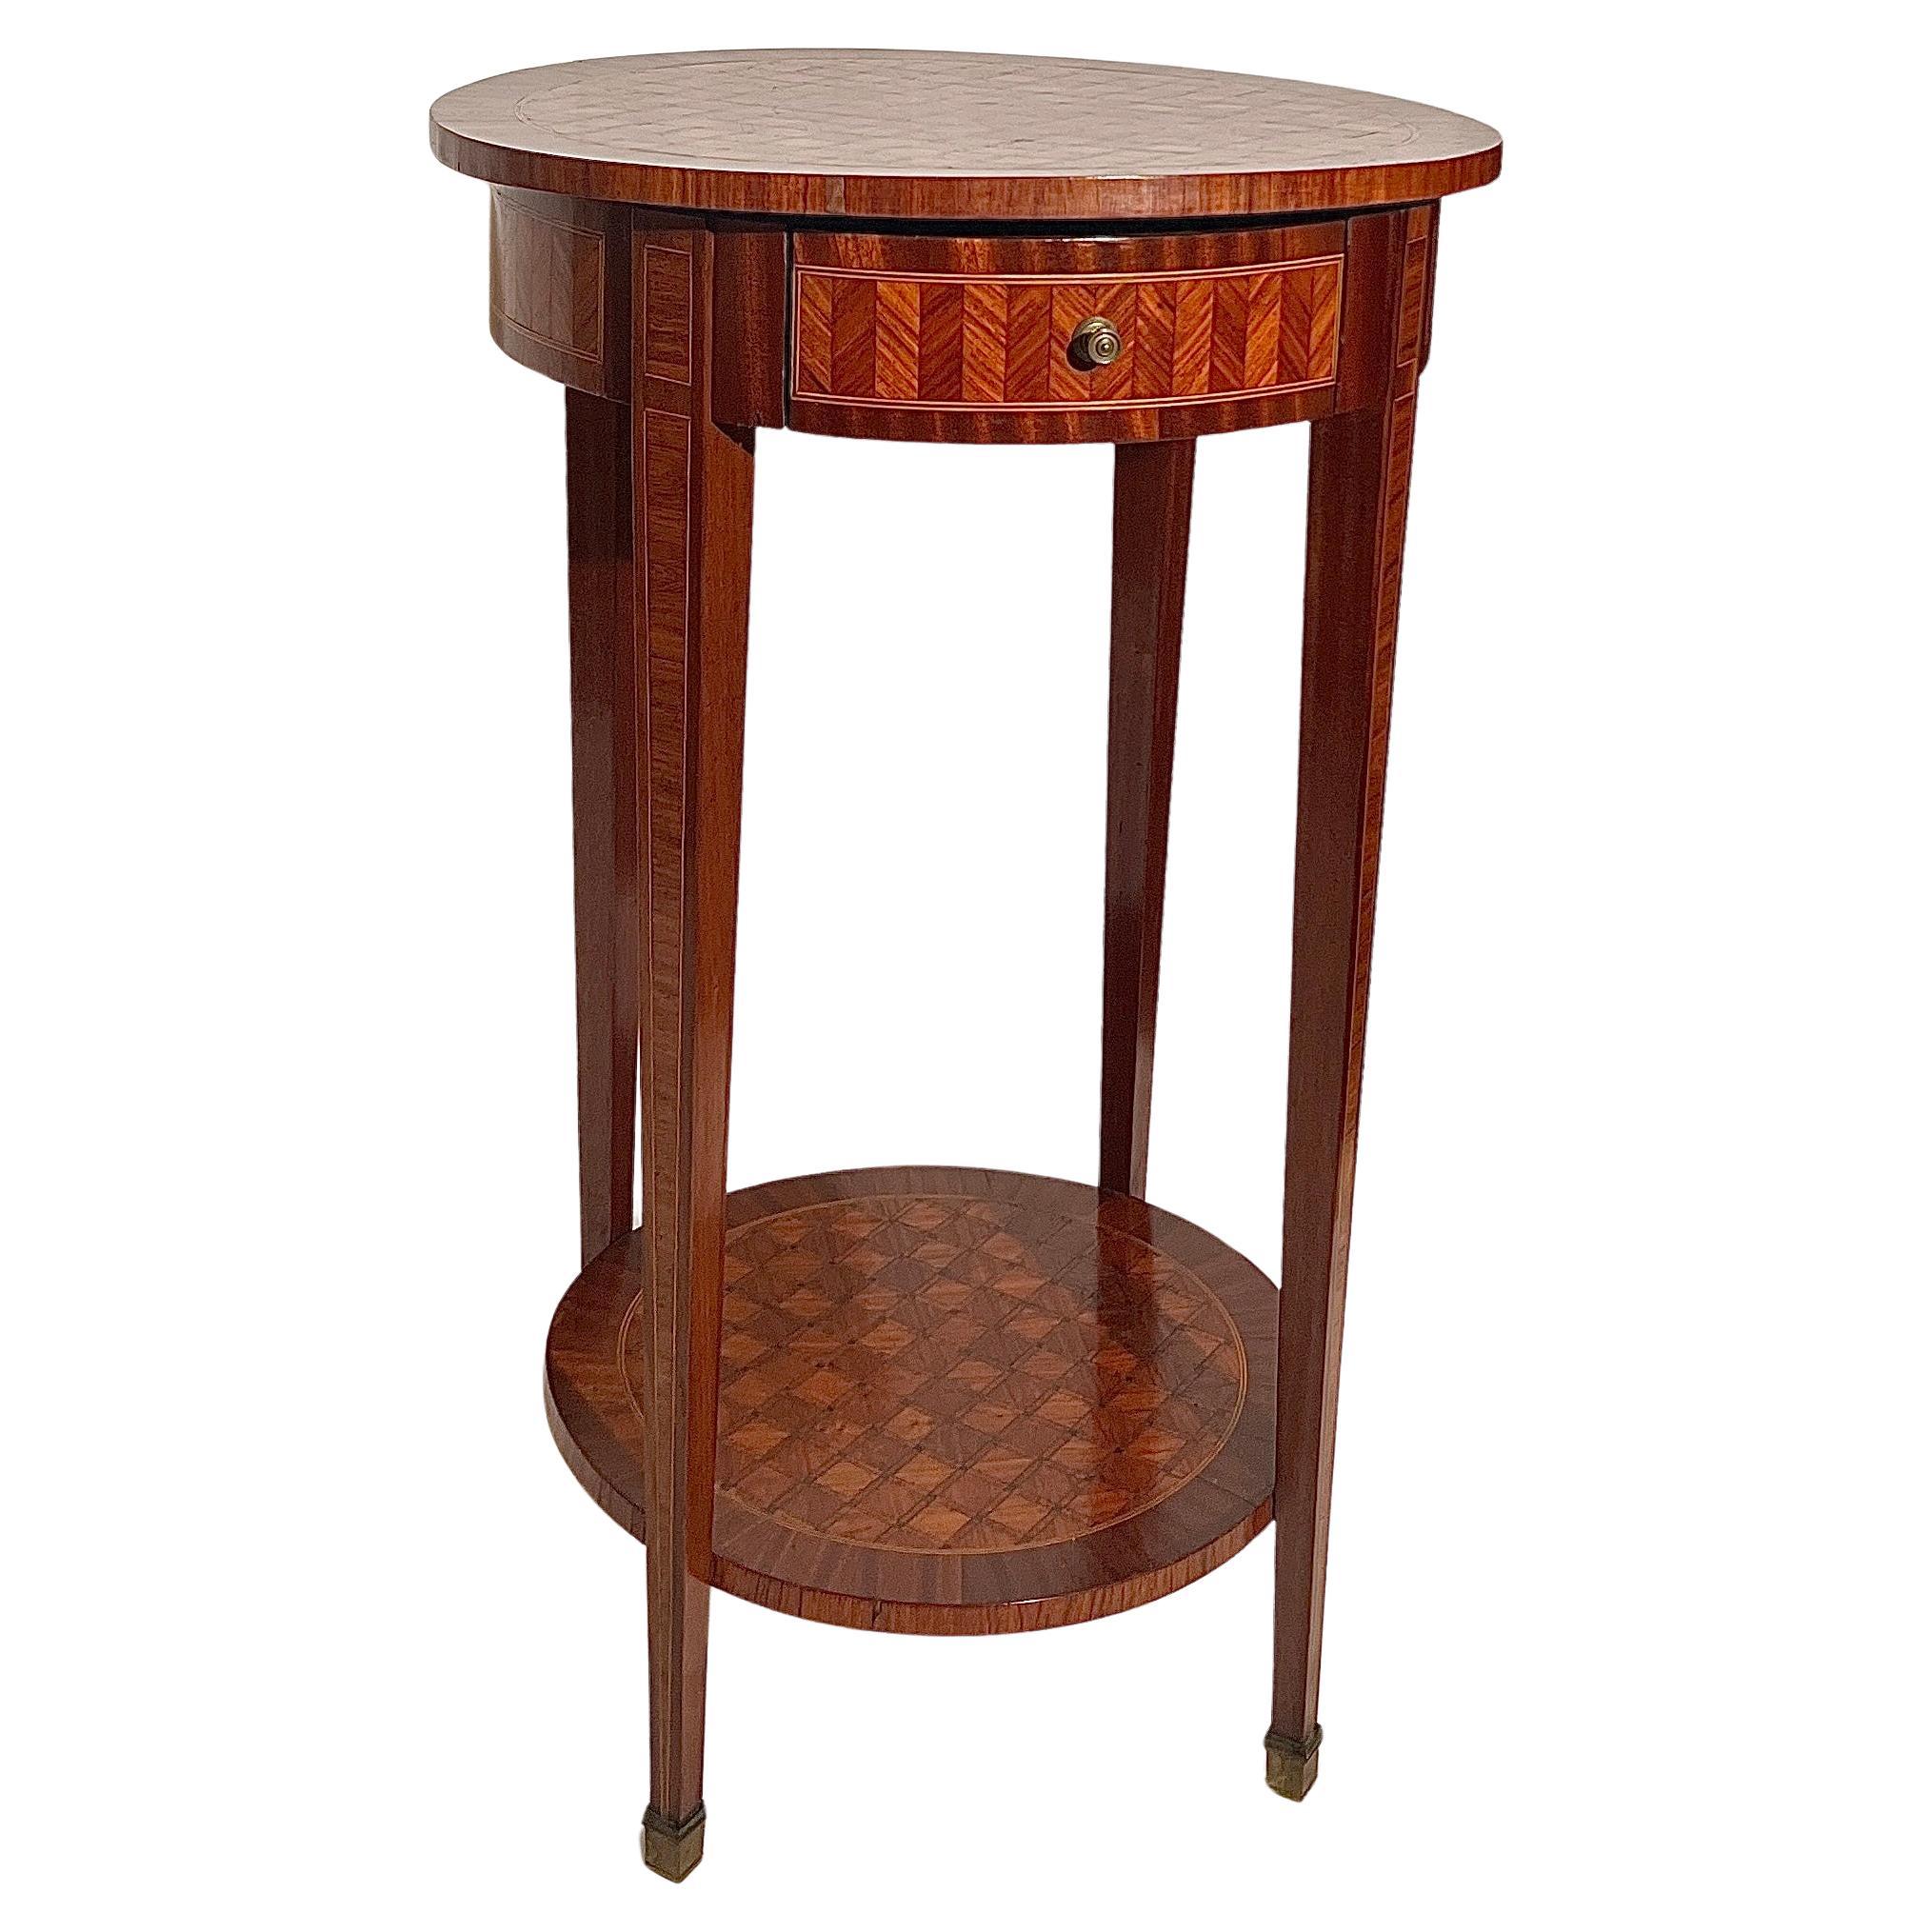 Antique French Marquetry Inlay Bouillotte Table, Circa 1900. For Sale